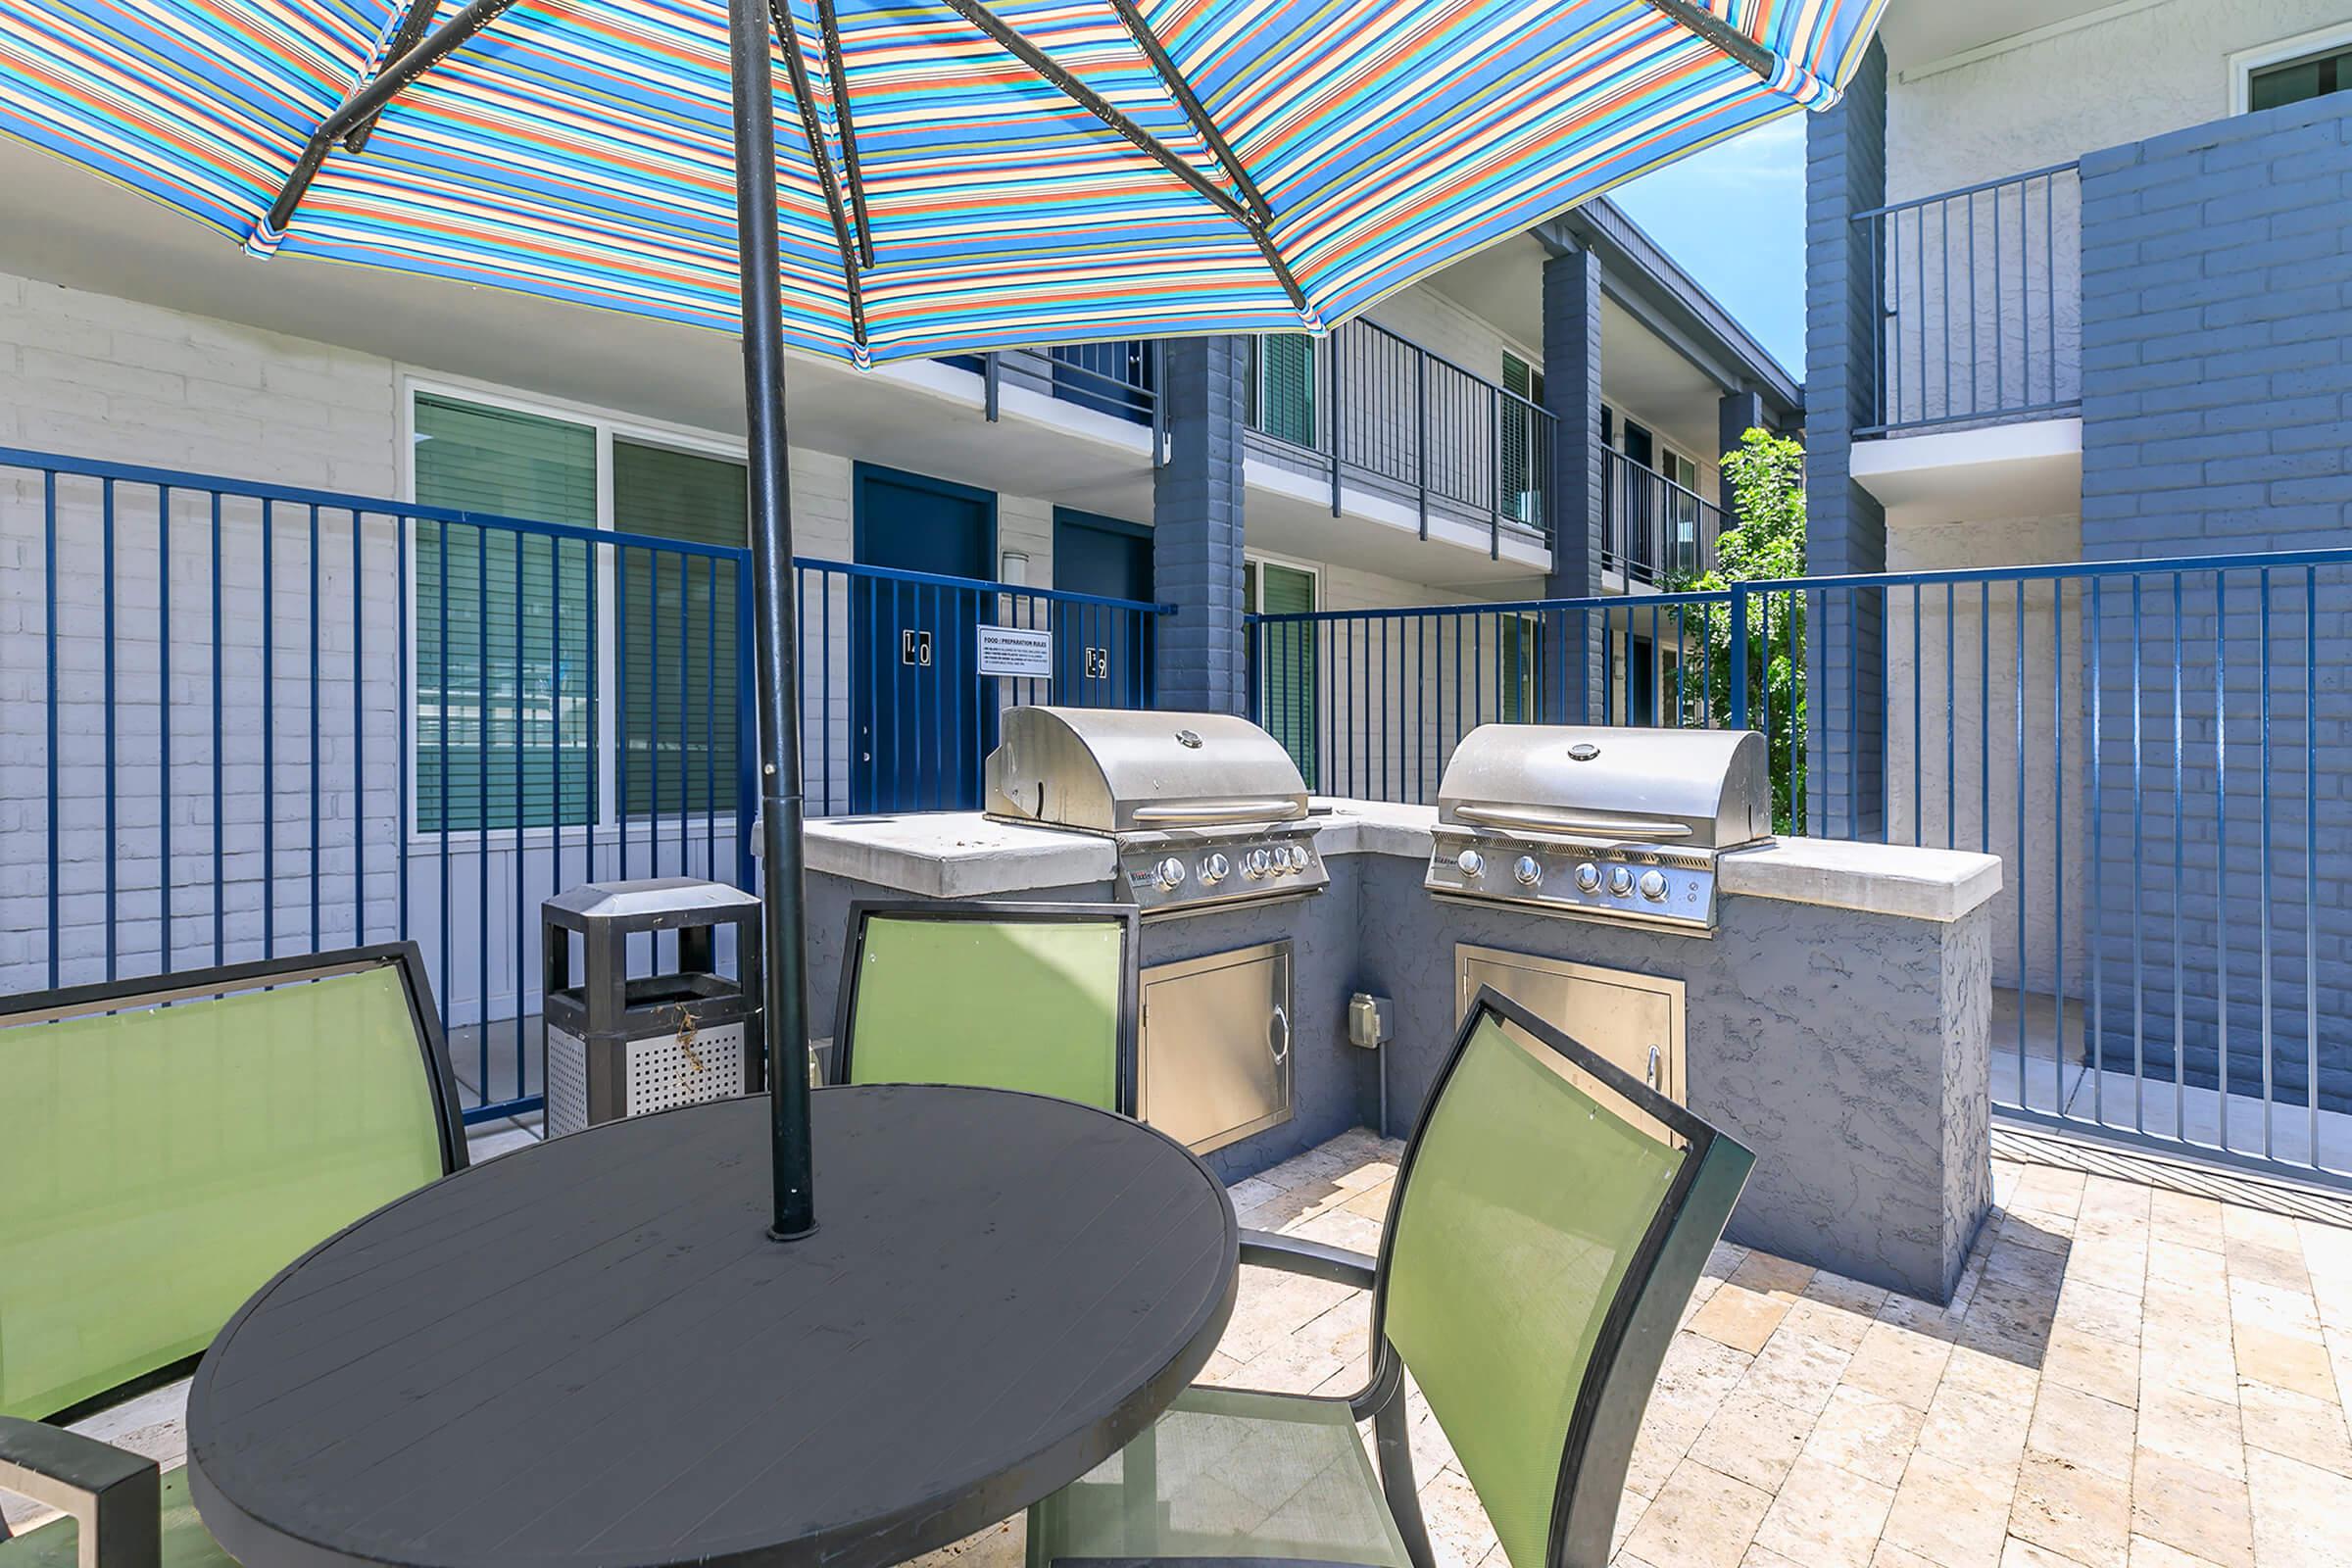 Outdoor patio dining set with large shaded umbrella next to 2 bbq grills at Rise Canyon West apartments in Phoenix